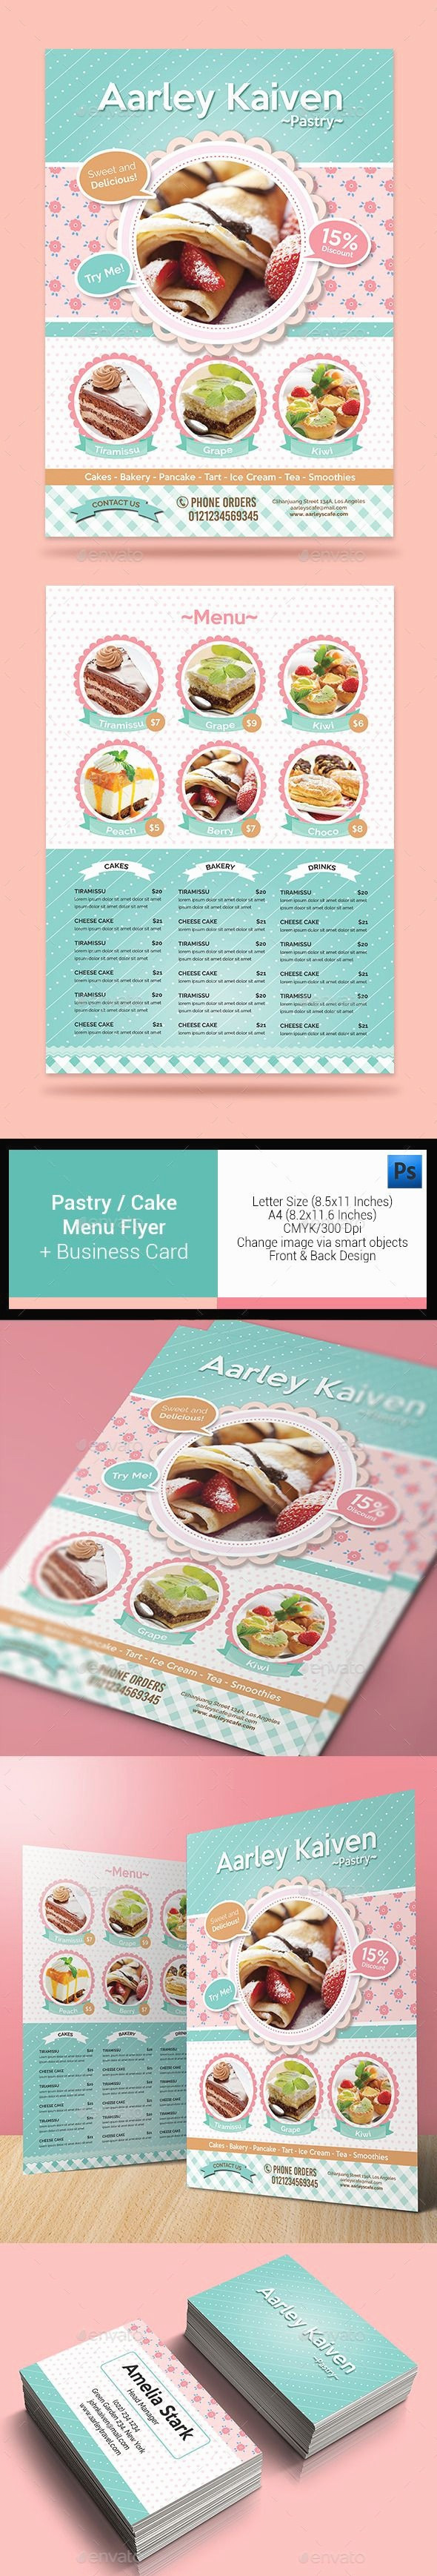 Cake Flyer New Free Flyer Hd Luxury Poster Templates 0d Of Business Card Templates